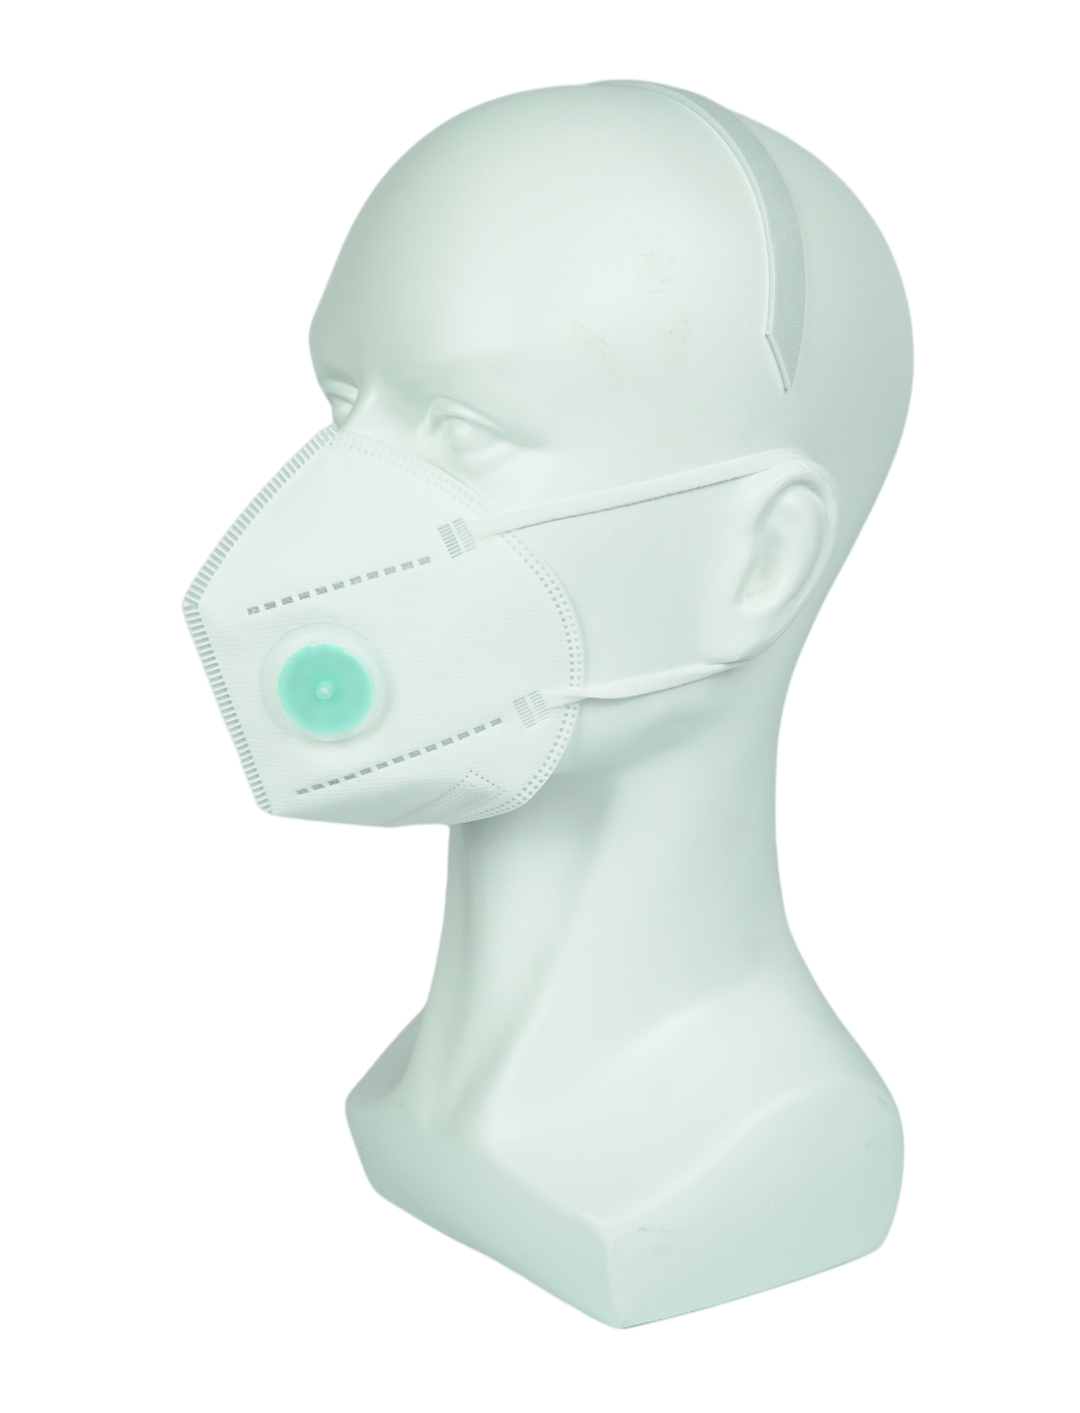 China White  KN95 non-medical protective mask with valve Manufacturers, Factory - Buy White  KN95 non-medical protective mask with valve at Good Price - Sengtor